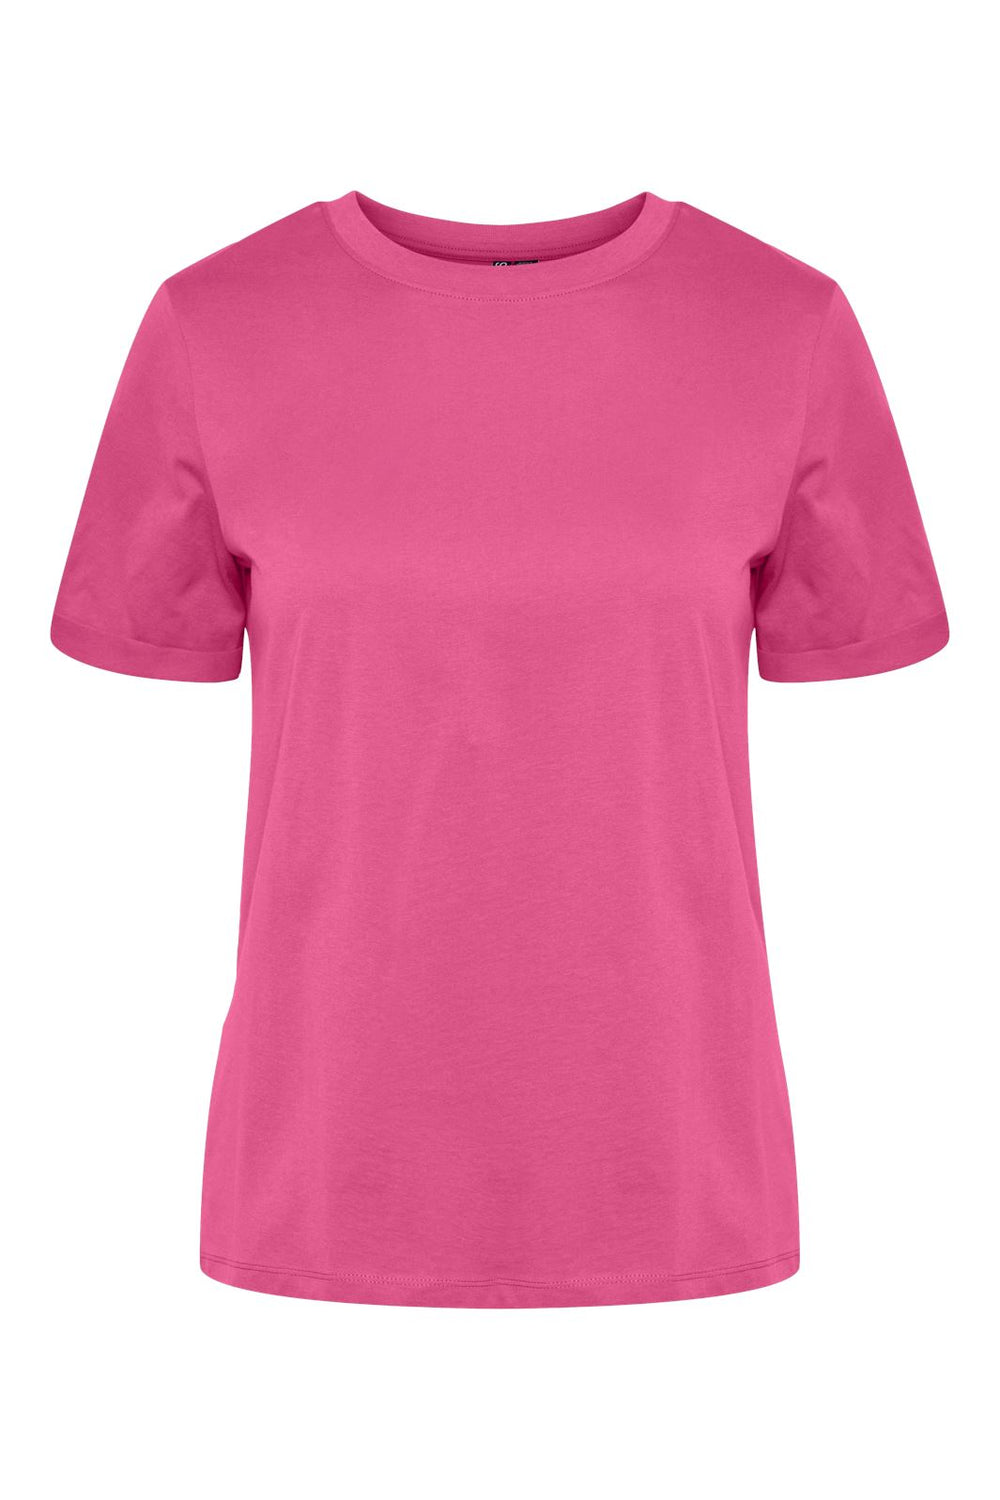 Pieces - Pcria Ss Fold Up Solid Tee - 3969196 Shocking Pink